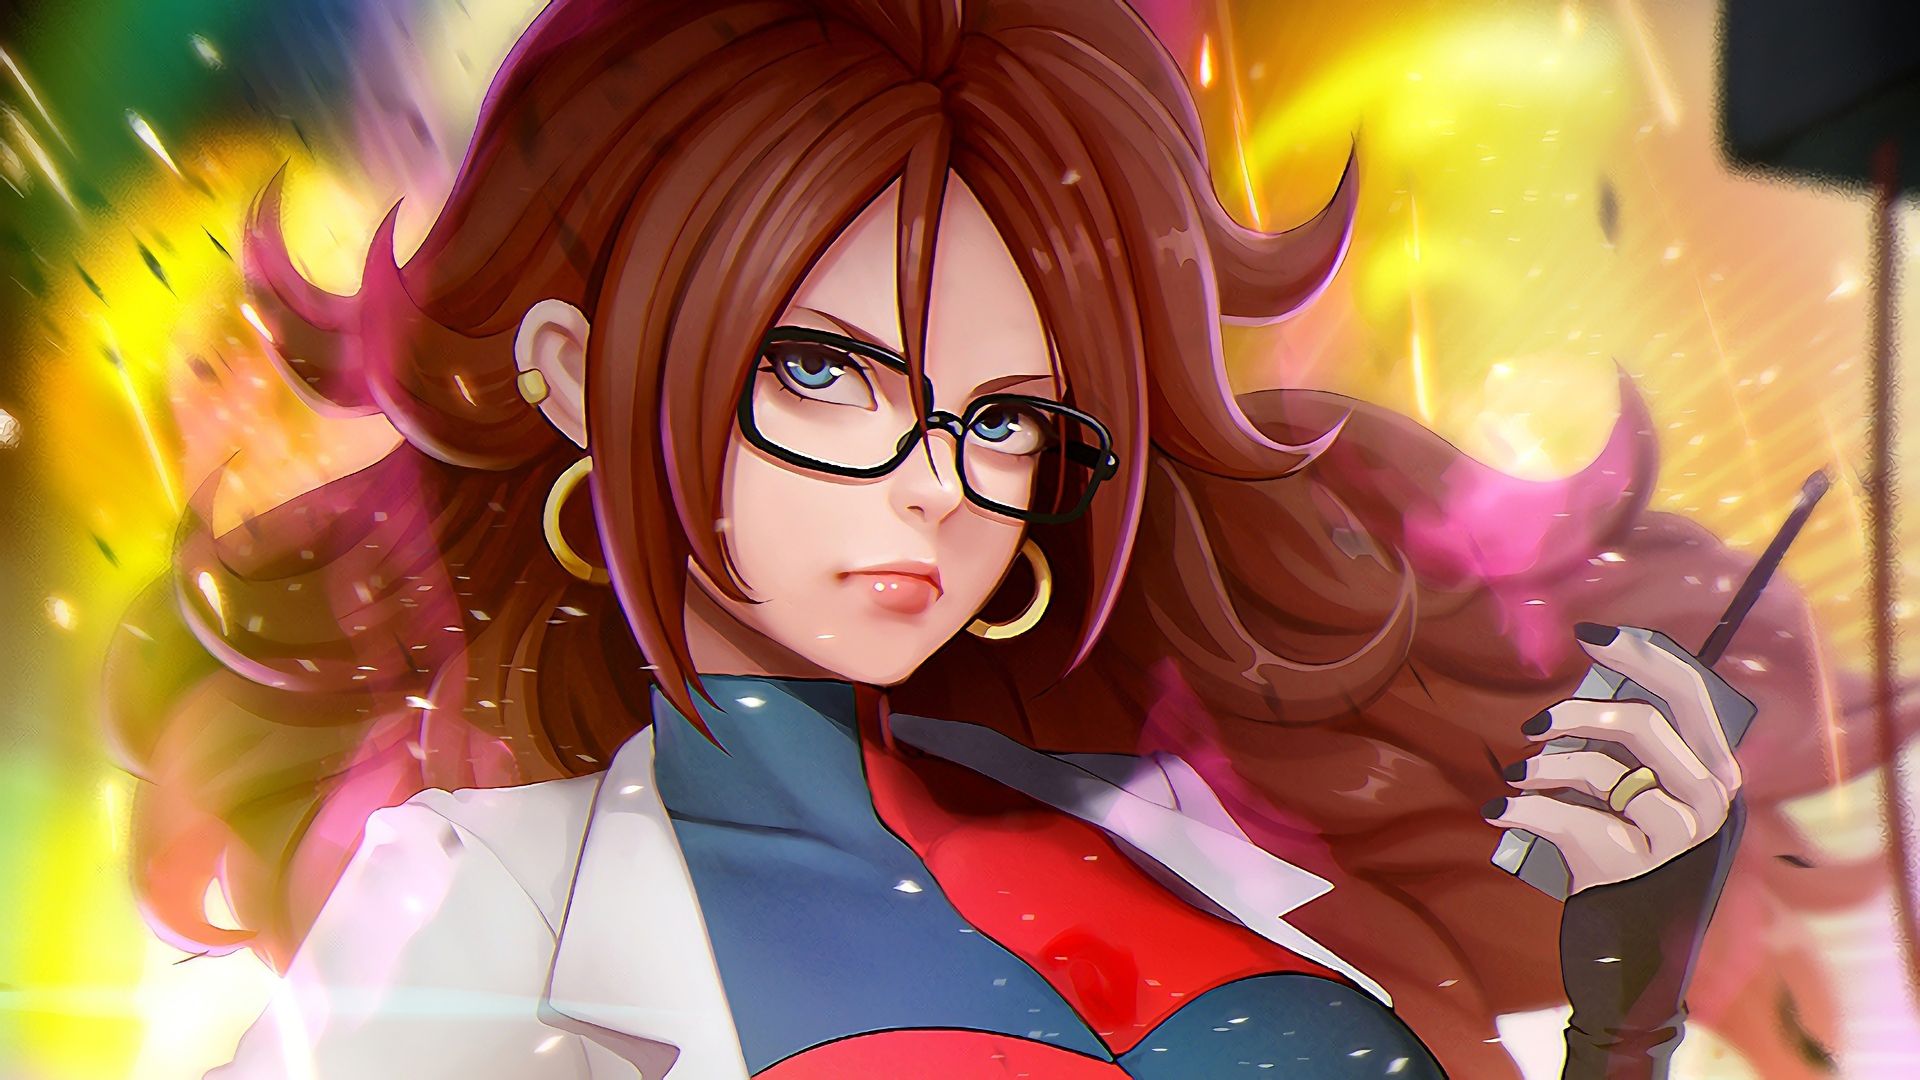 Android 21 Dragon Ball Fighter Z Laptop Full HD 1080P HD 4k Wallpaper, Image, Background, Photo and Picture